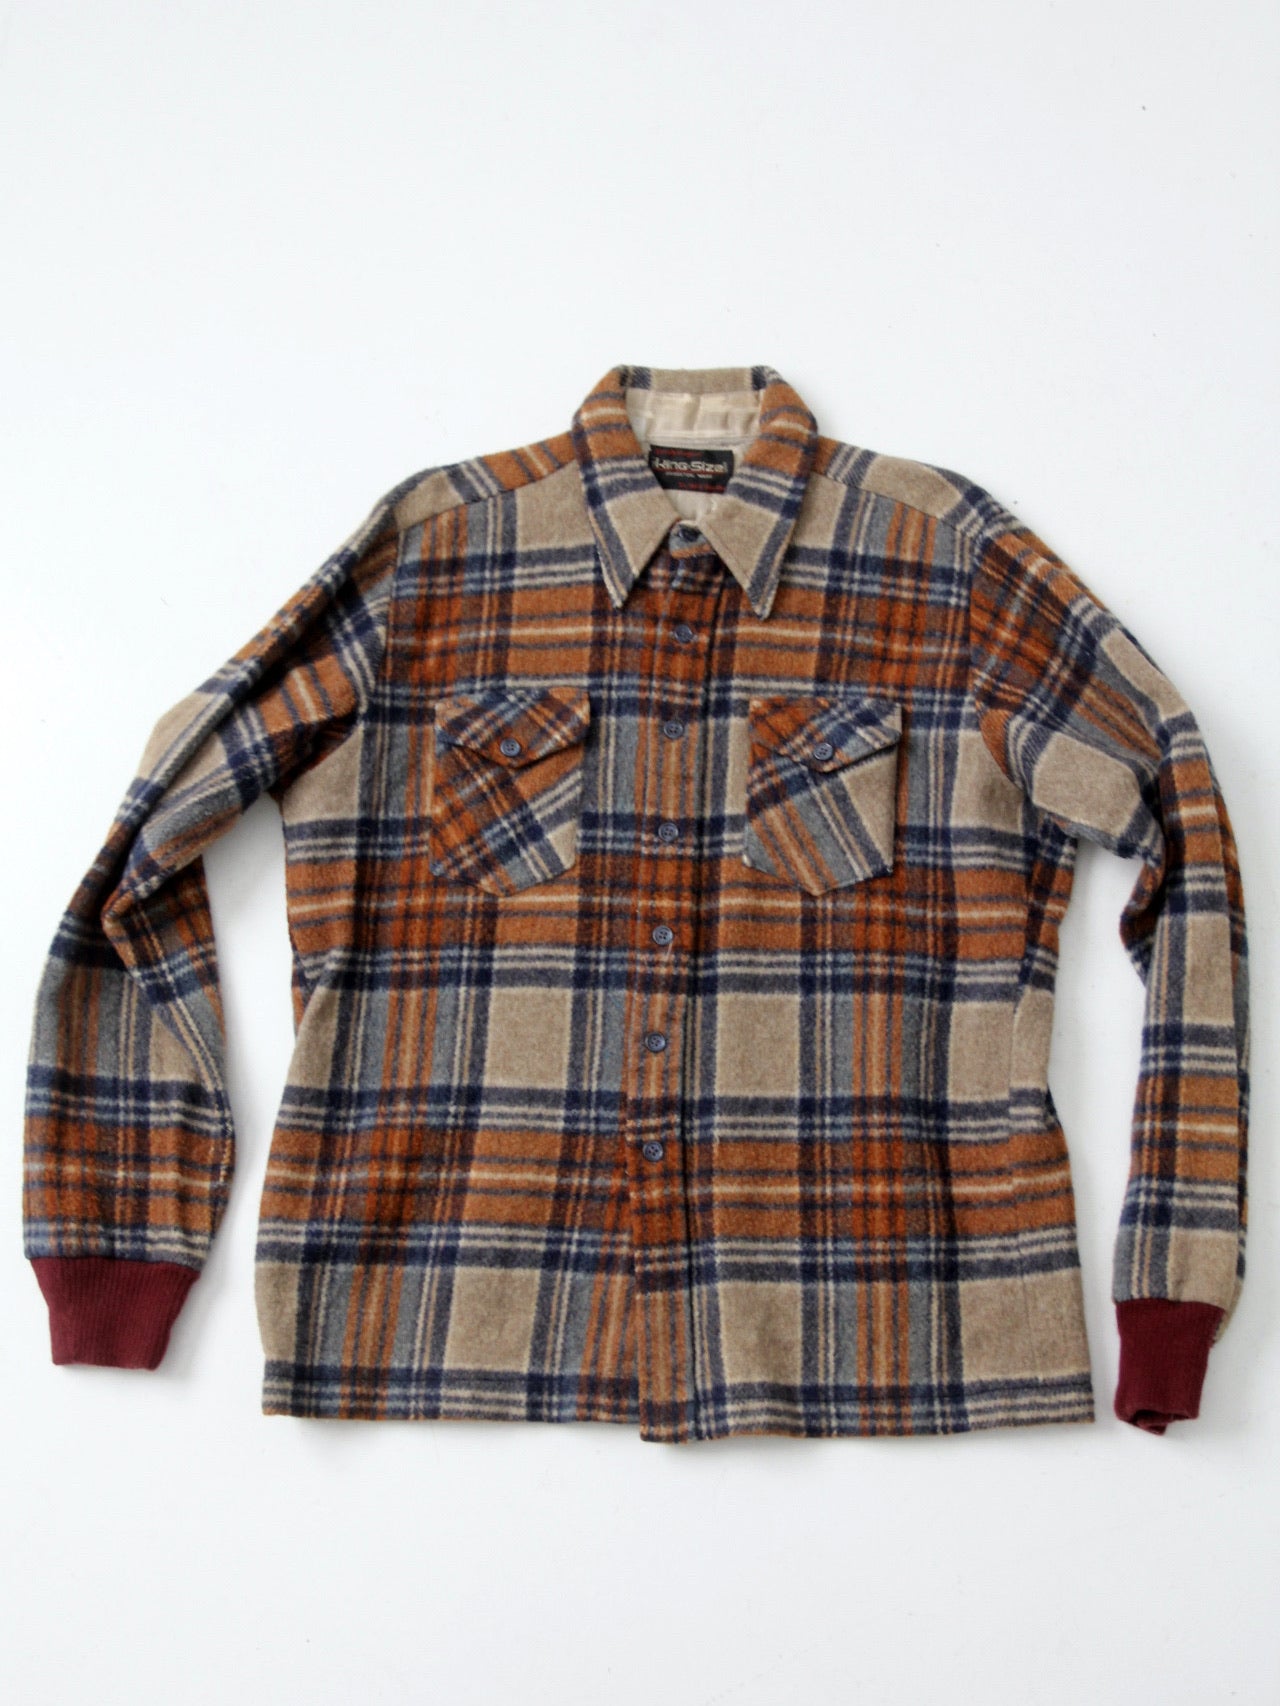 vintage 70s woolly plaid shirt jacket by the King Size Co